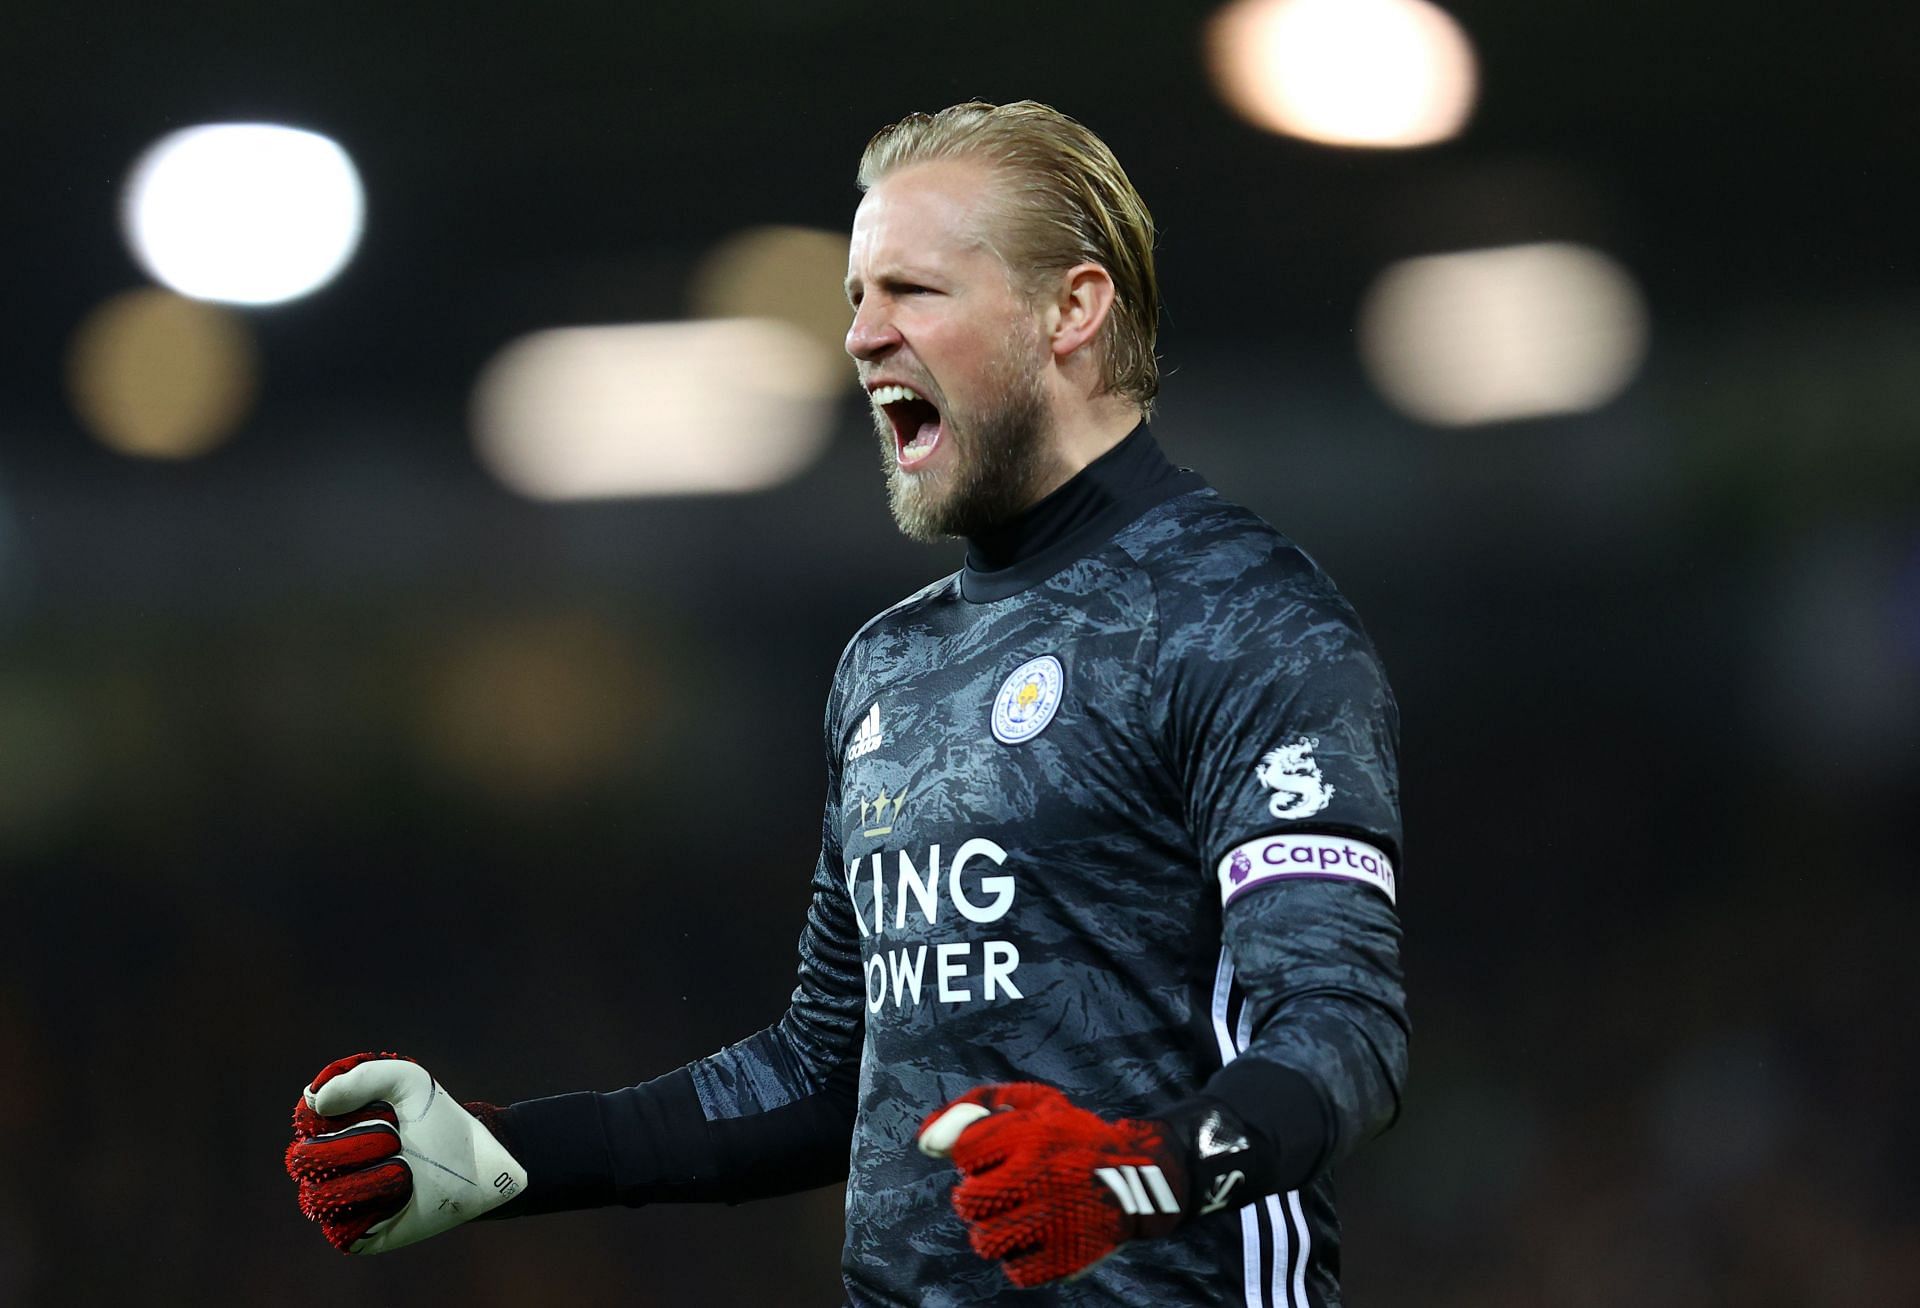 NLeicester City will look to sign Kasper Schmeichel replacement this summer